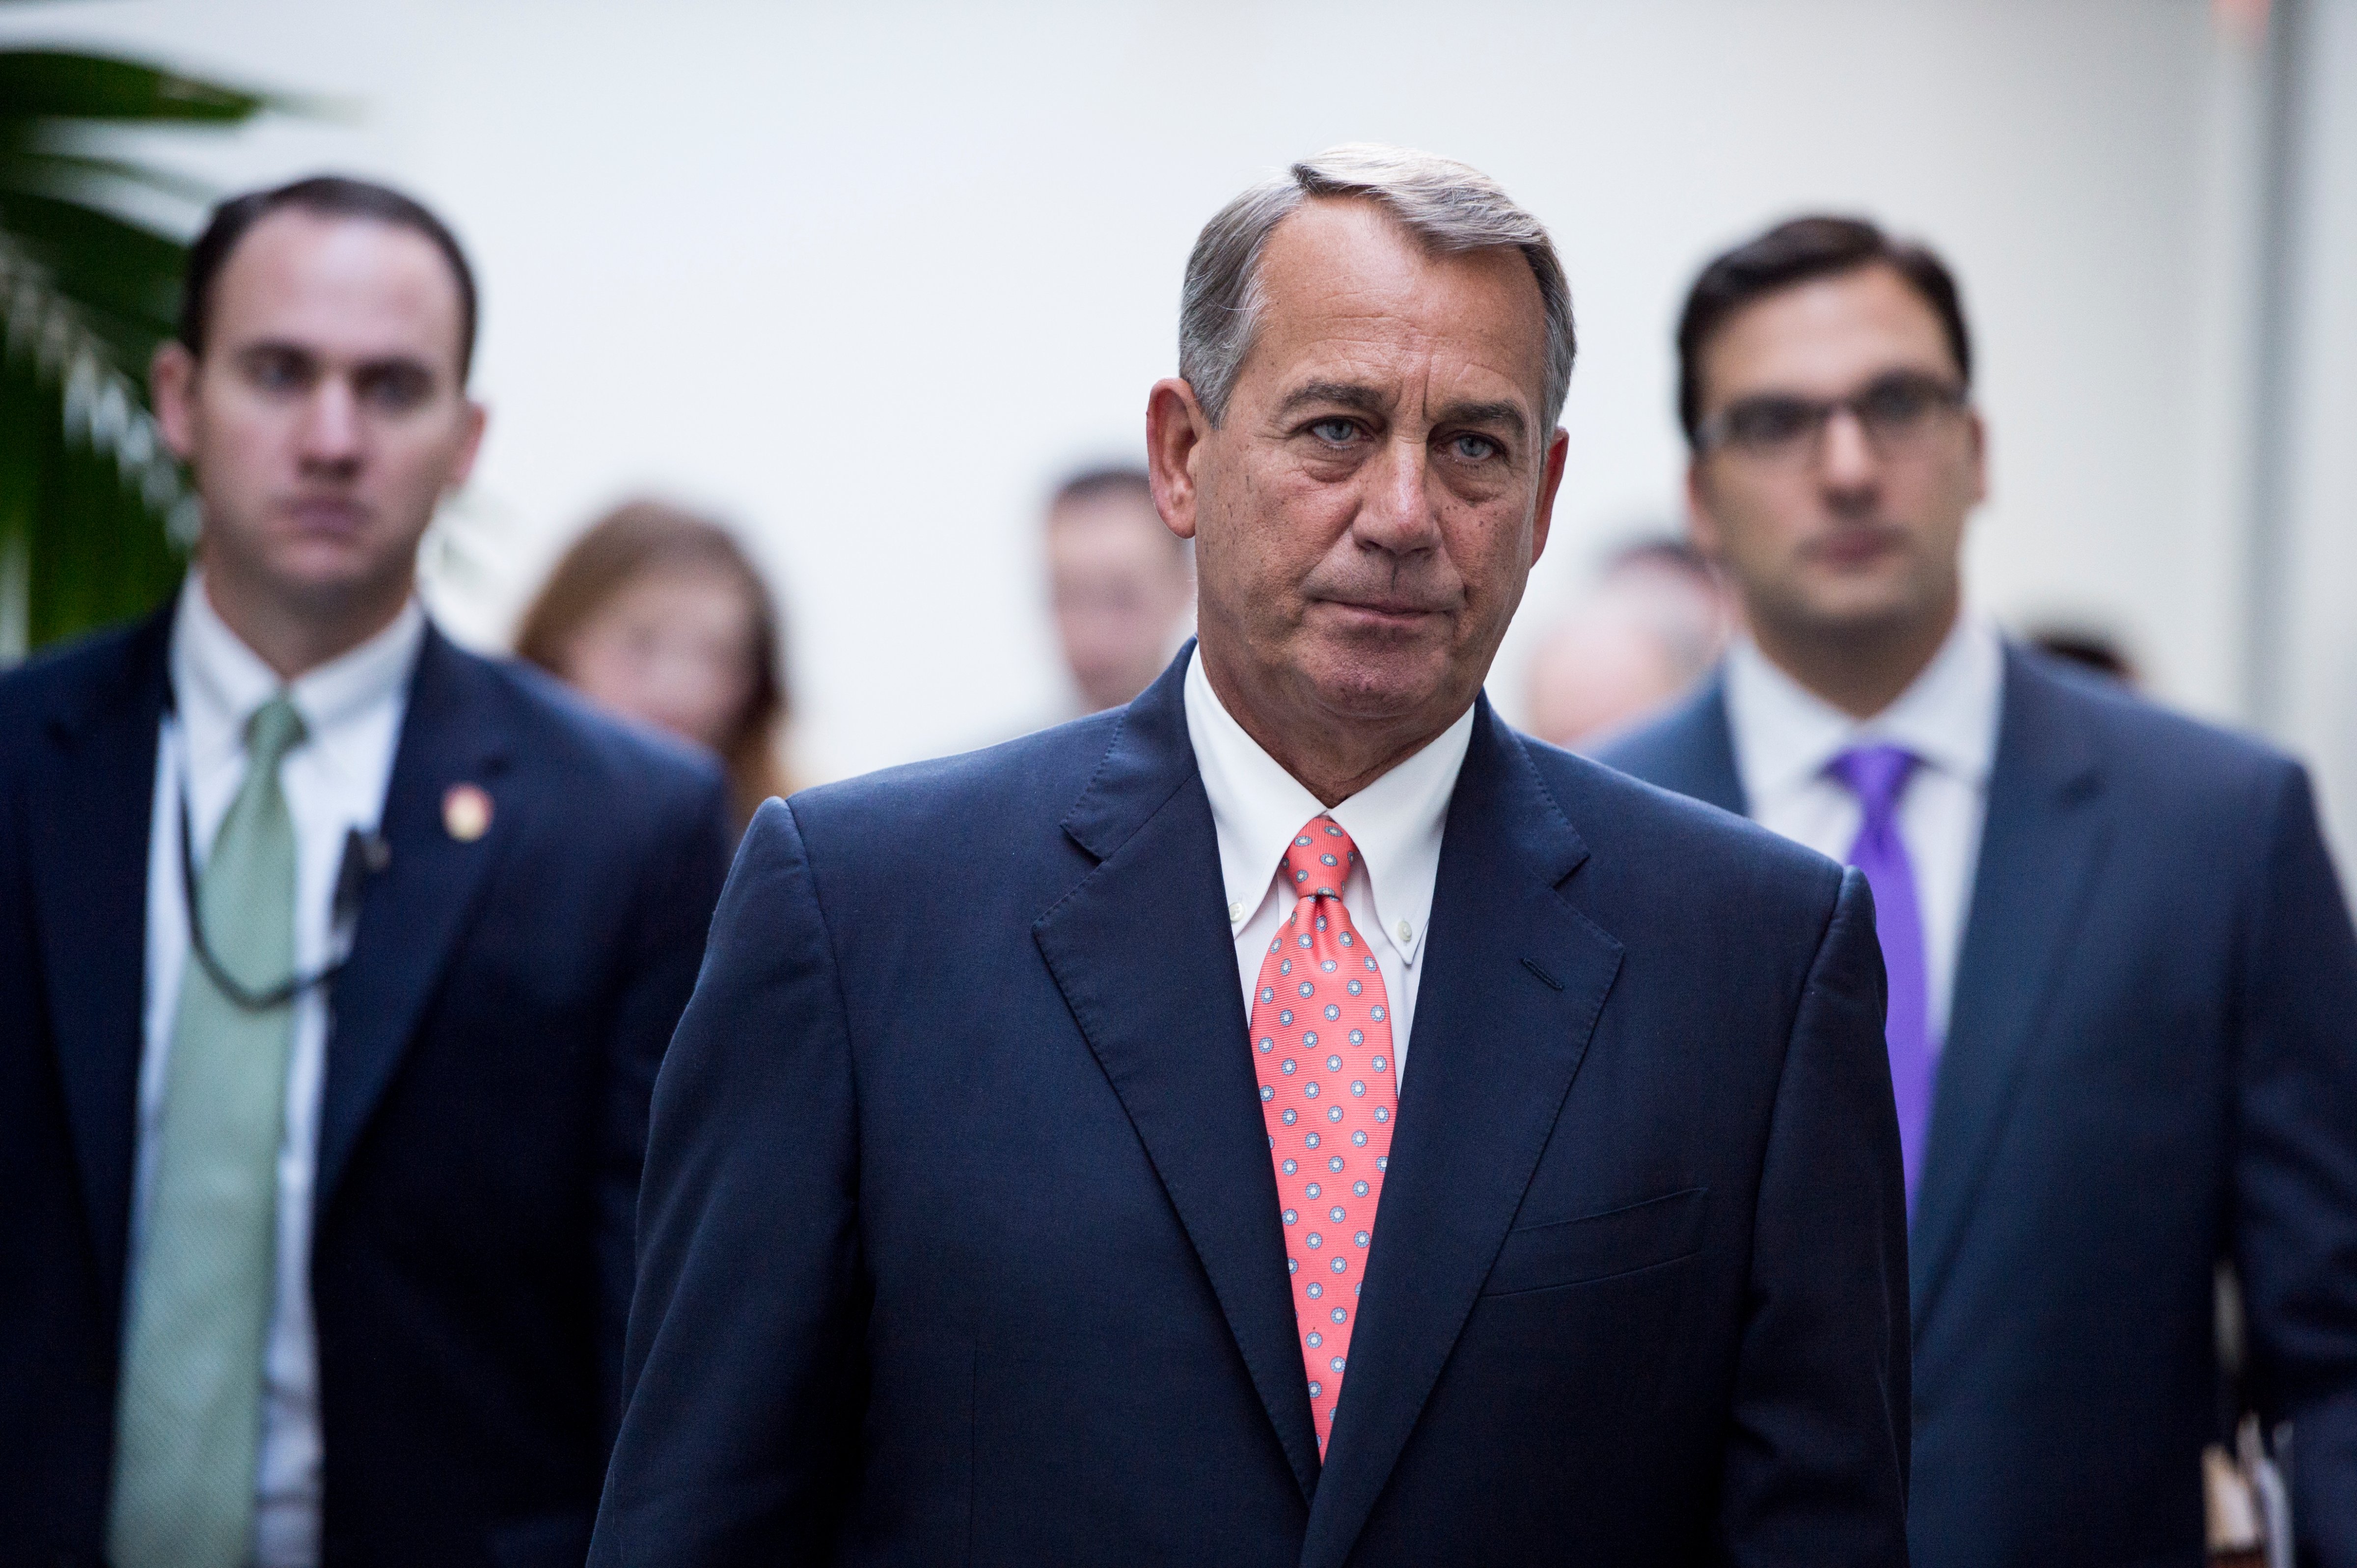 Speaker of the House John Boehner leaves the House Republican Conference meeting in the Capitol on Jan. 13, 2015. (Bill Clark&amp;amp;—CQ-Roll Call,Inc./Getty Images)